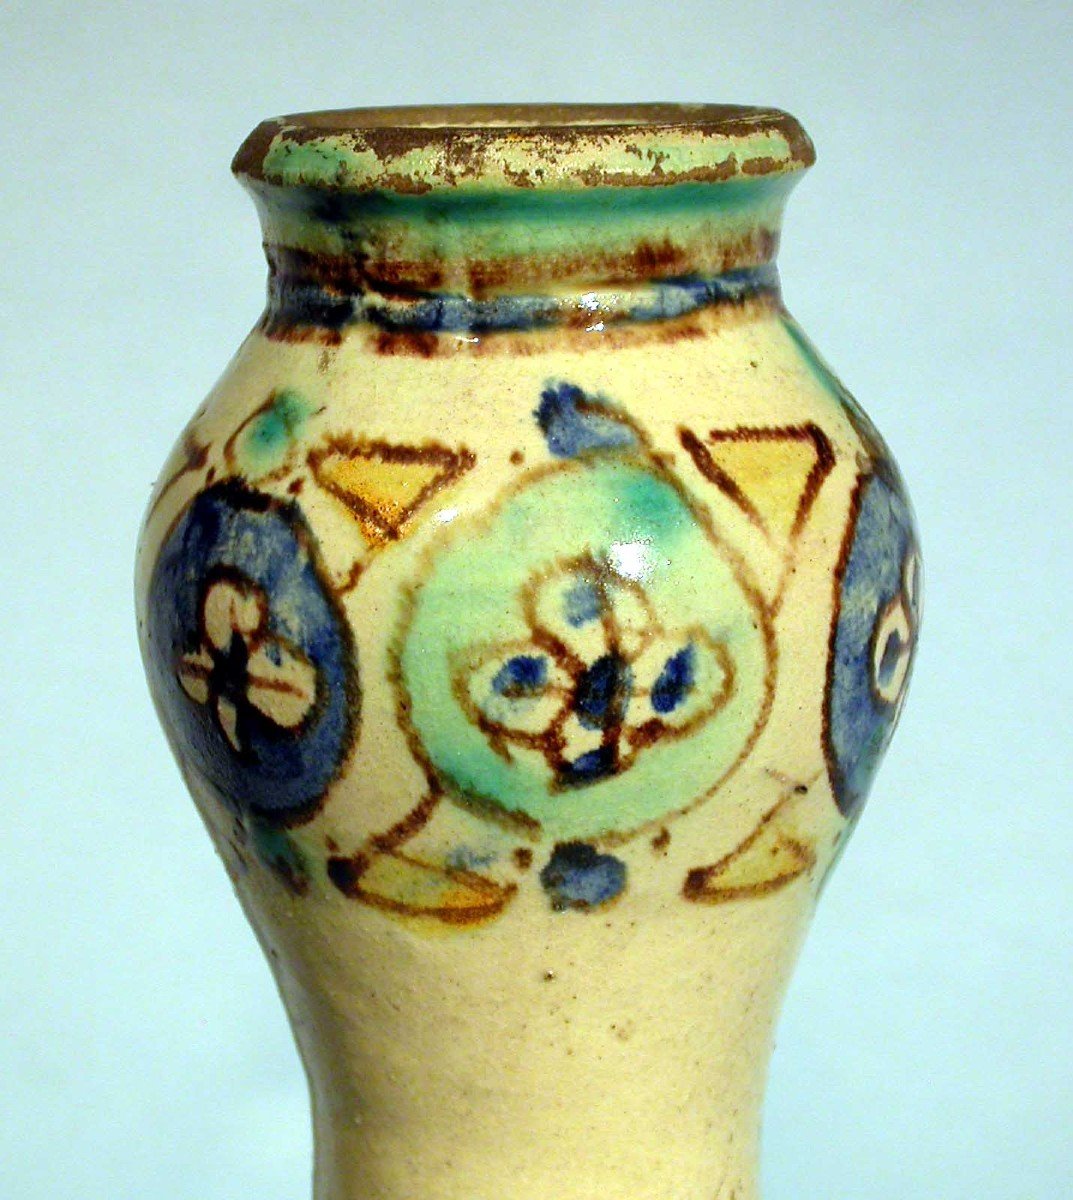 Earthenware Bottle - Marocco Or Tunisia, End Of The 19th Century-photo-1